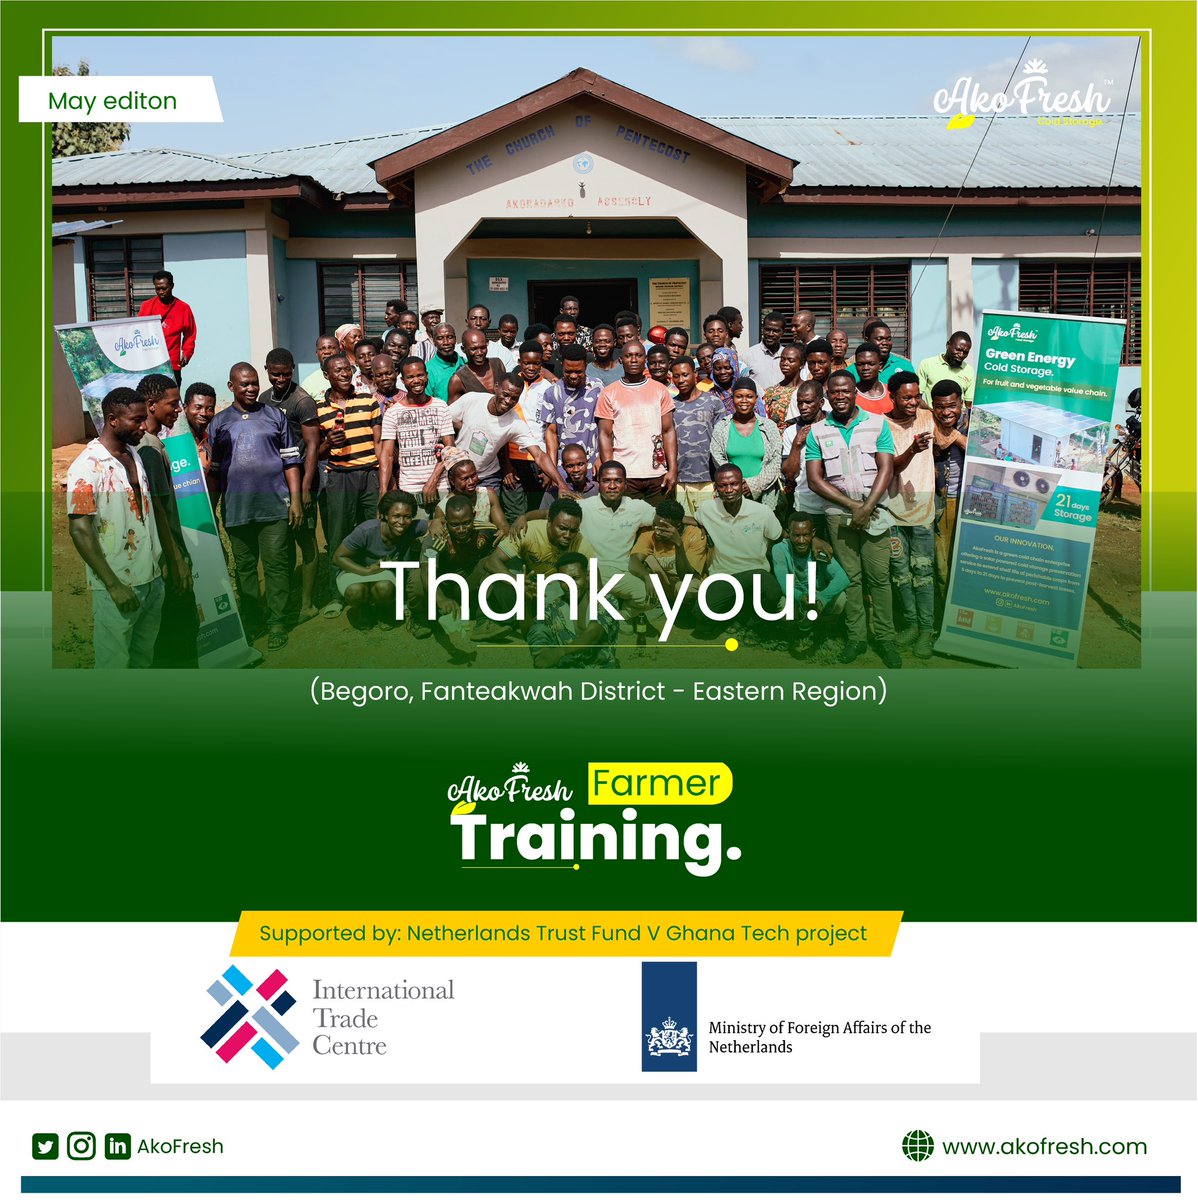 Our recent farmer training event was a tremendous success, equipping passionate farmers with essential digital skills, postharvest management techniques, and climate smart agriculture knowledge. 🌾🧑🏾‍🌾

Supported by #NTF5Ghana Tech Project

#empoweringfarmers  #DigitalSkils